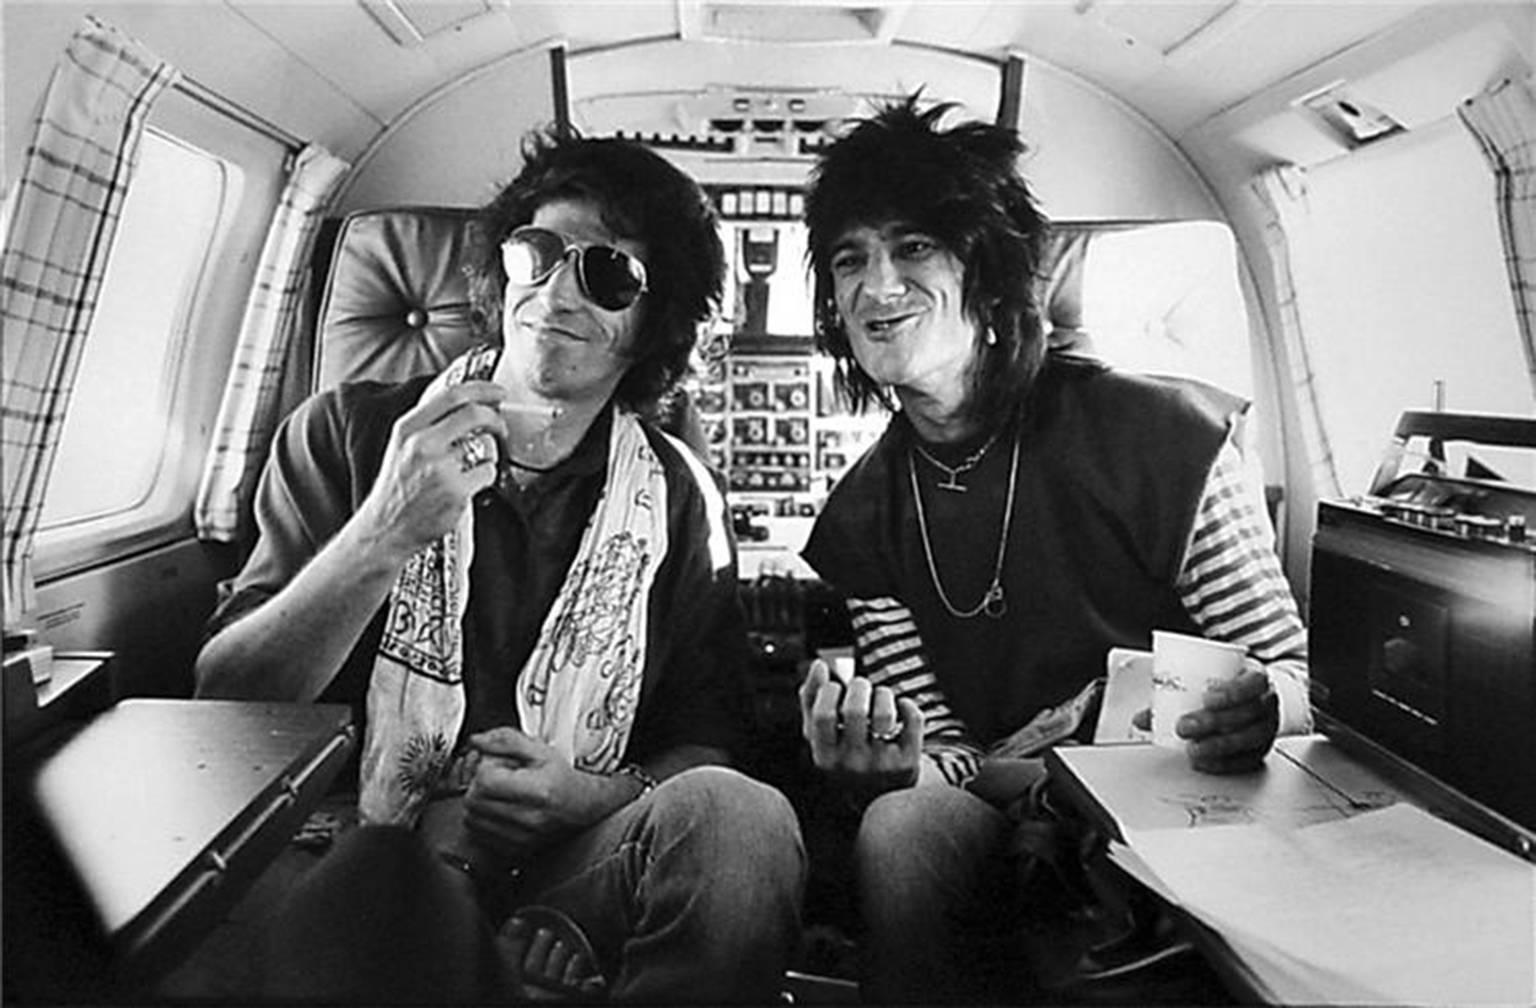 Henry Diltz Portrait Photograph - Keith Richards and Ron Wood, Los Angeles, CA, 1979